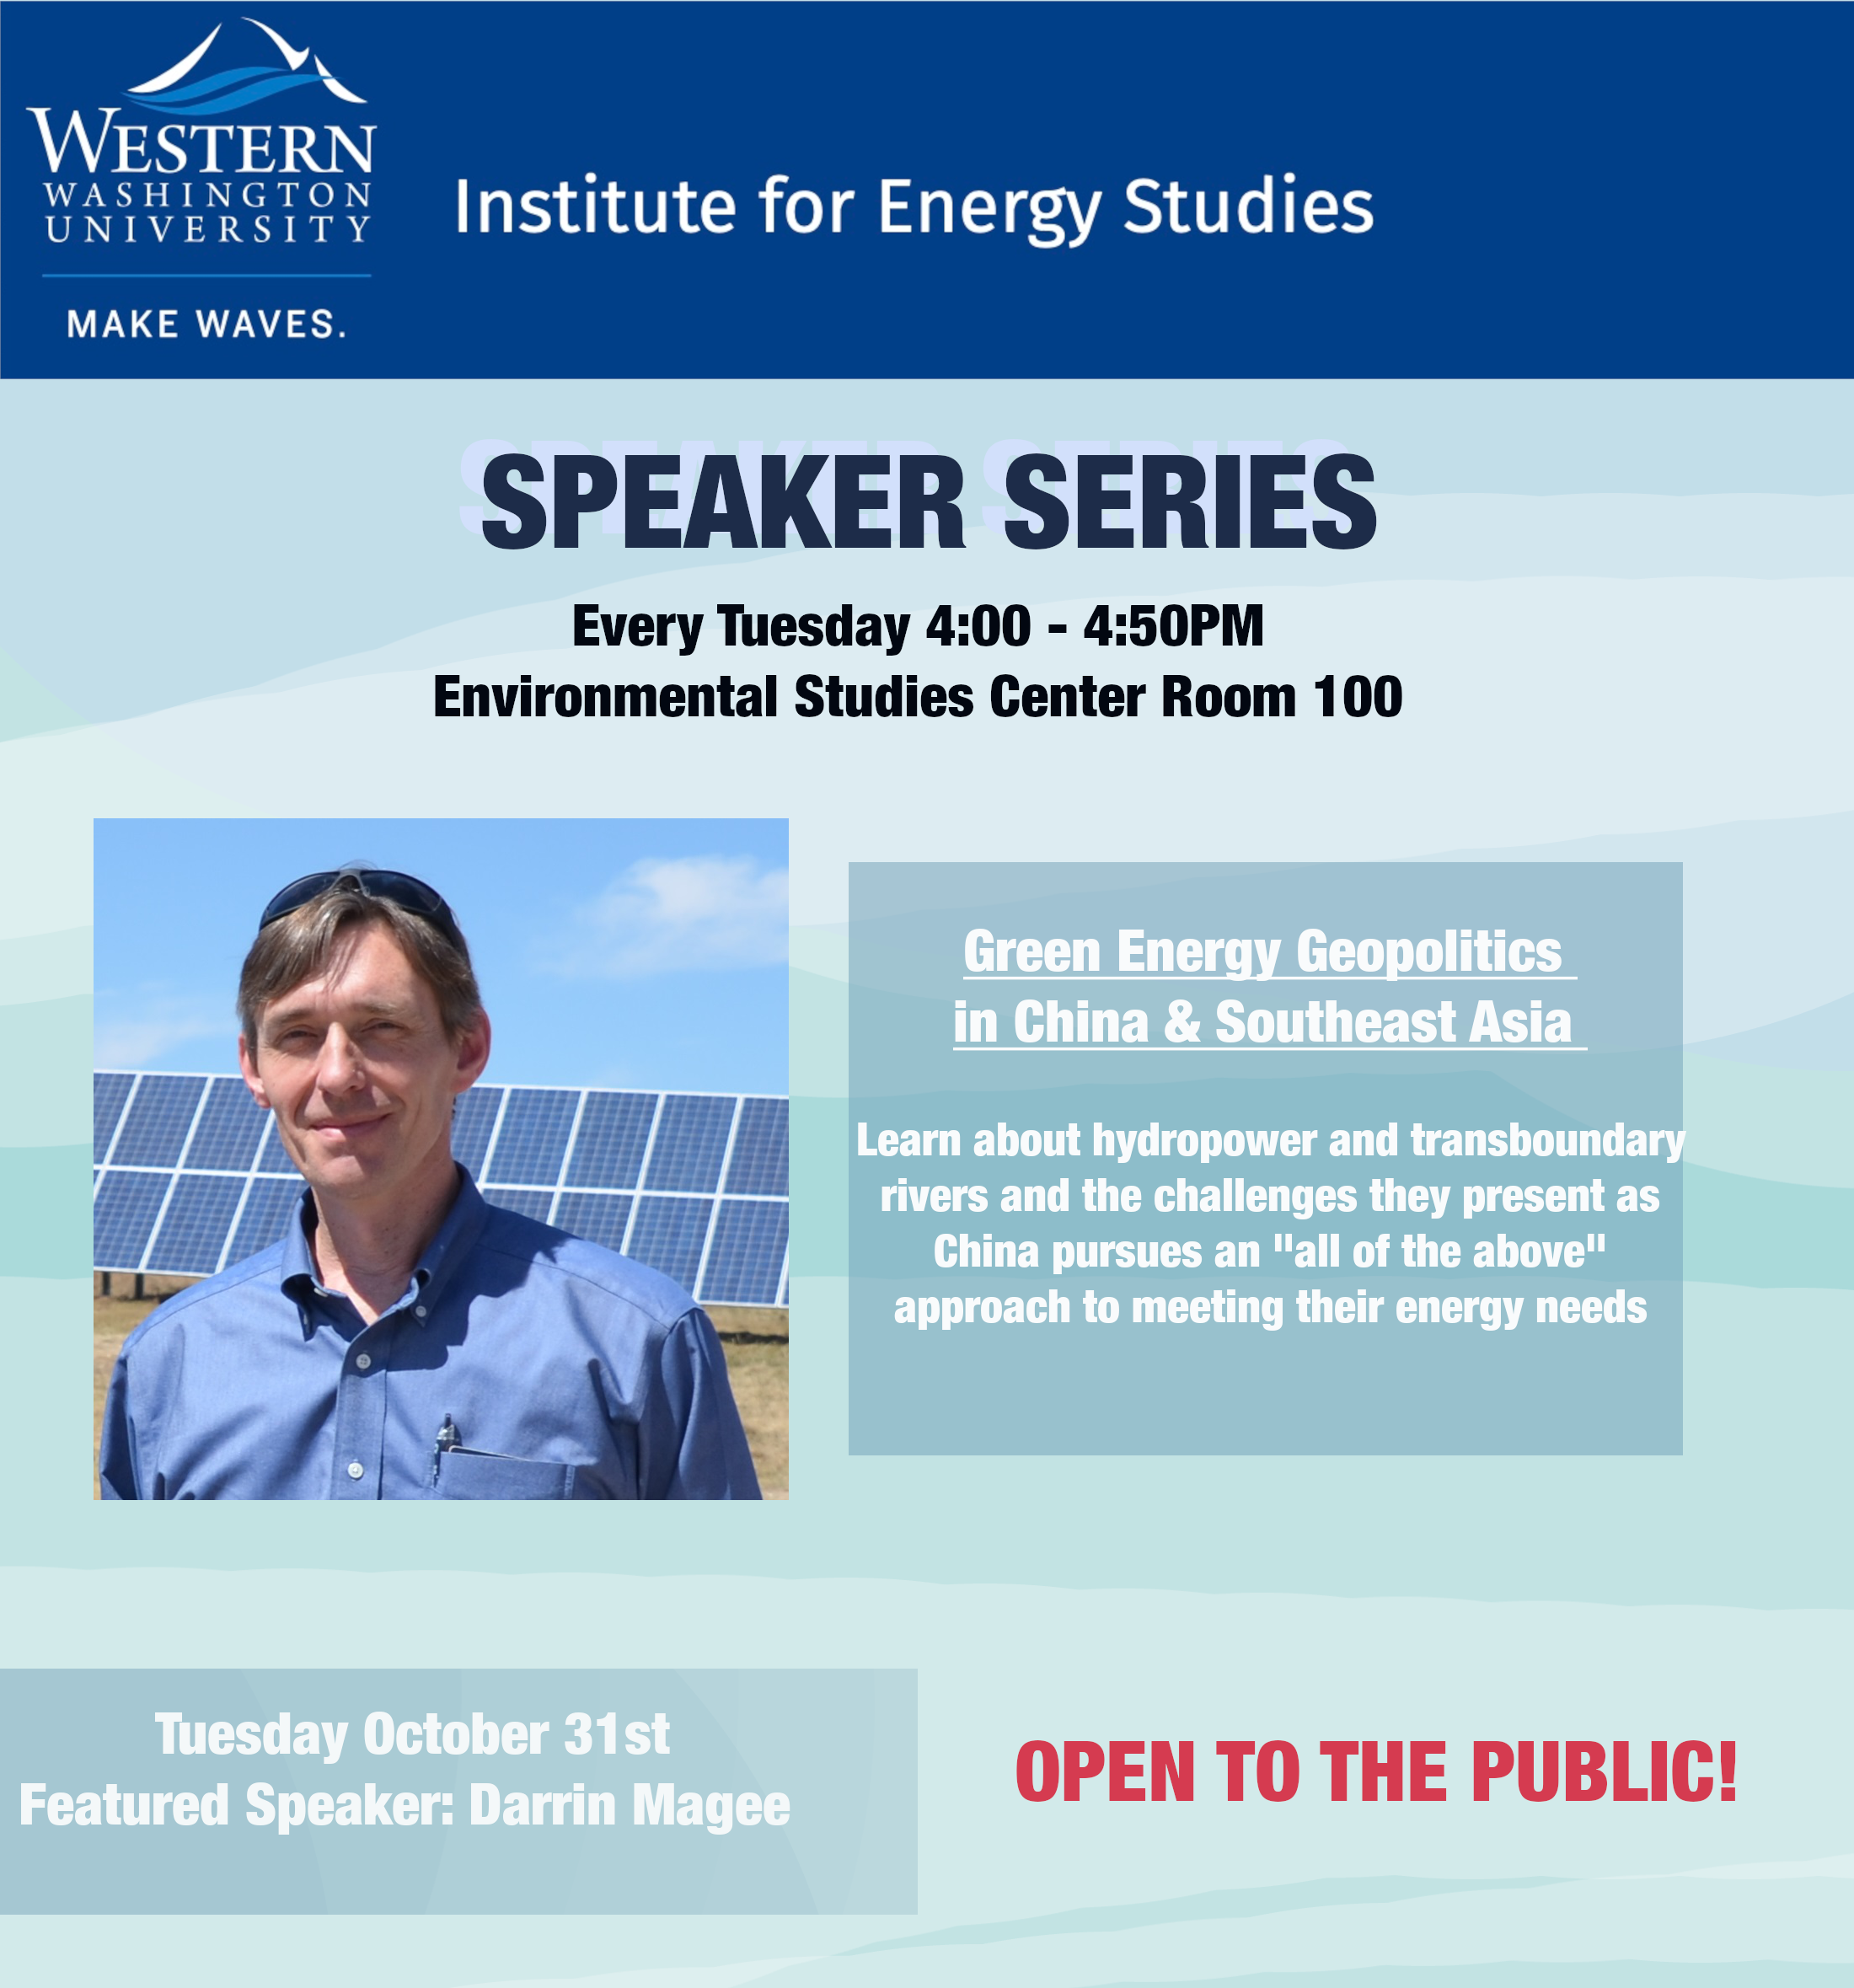 Event flyer with headshot of Darrin Magee. He is wearing a blue button down shirt and is standing in front of a bank of solar panels.